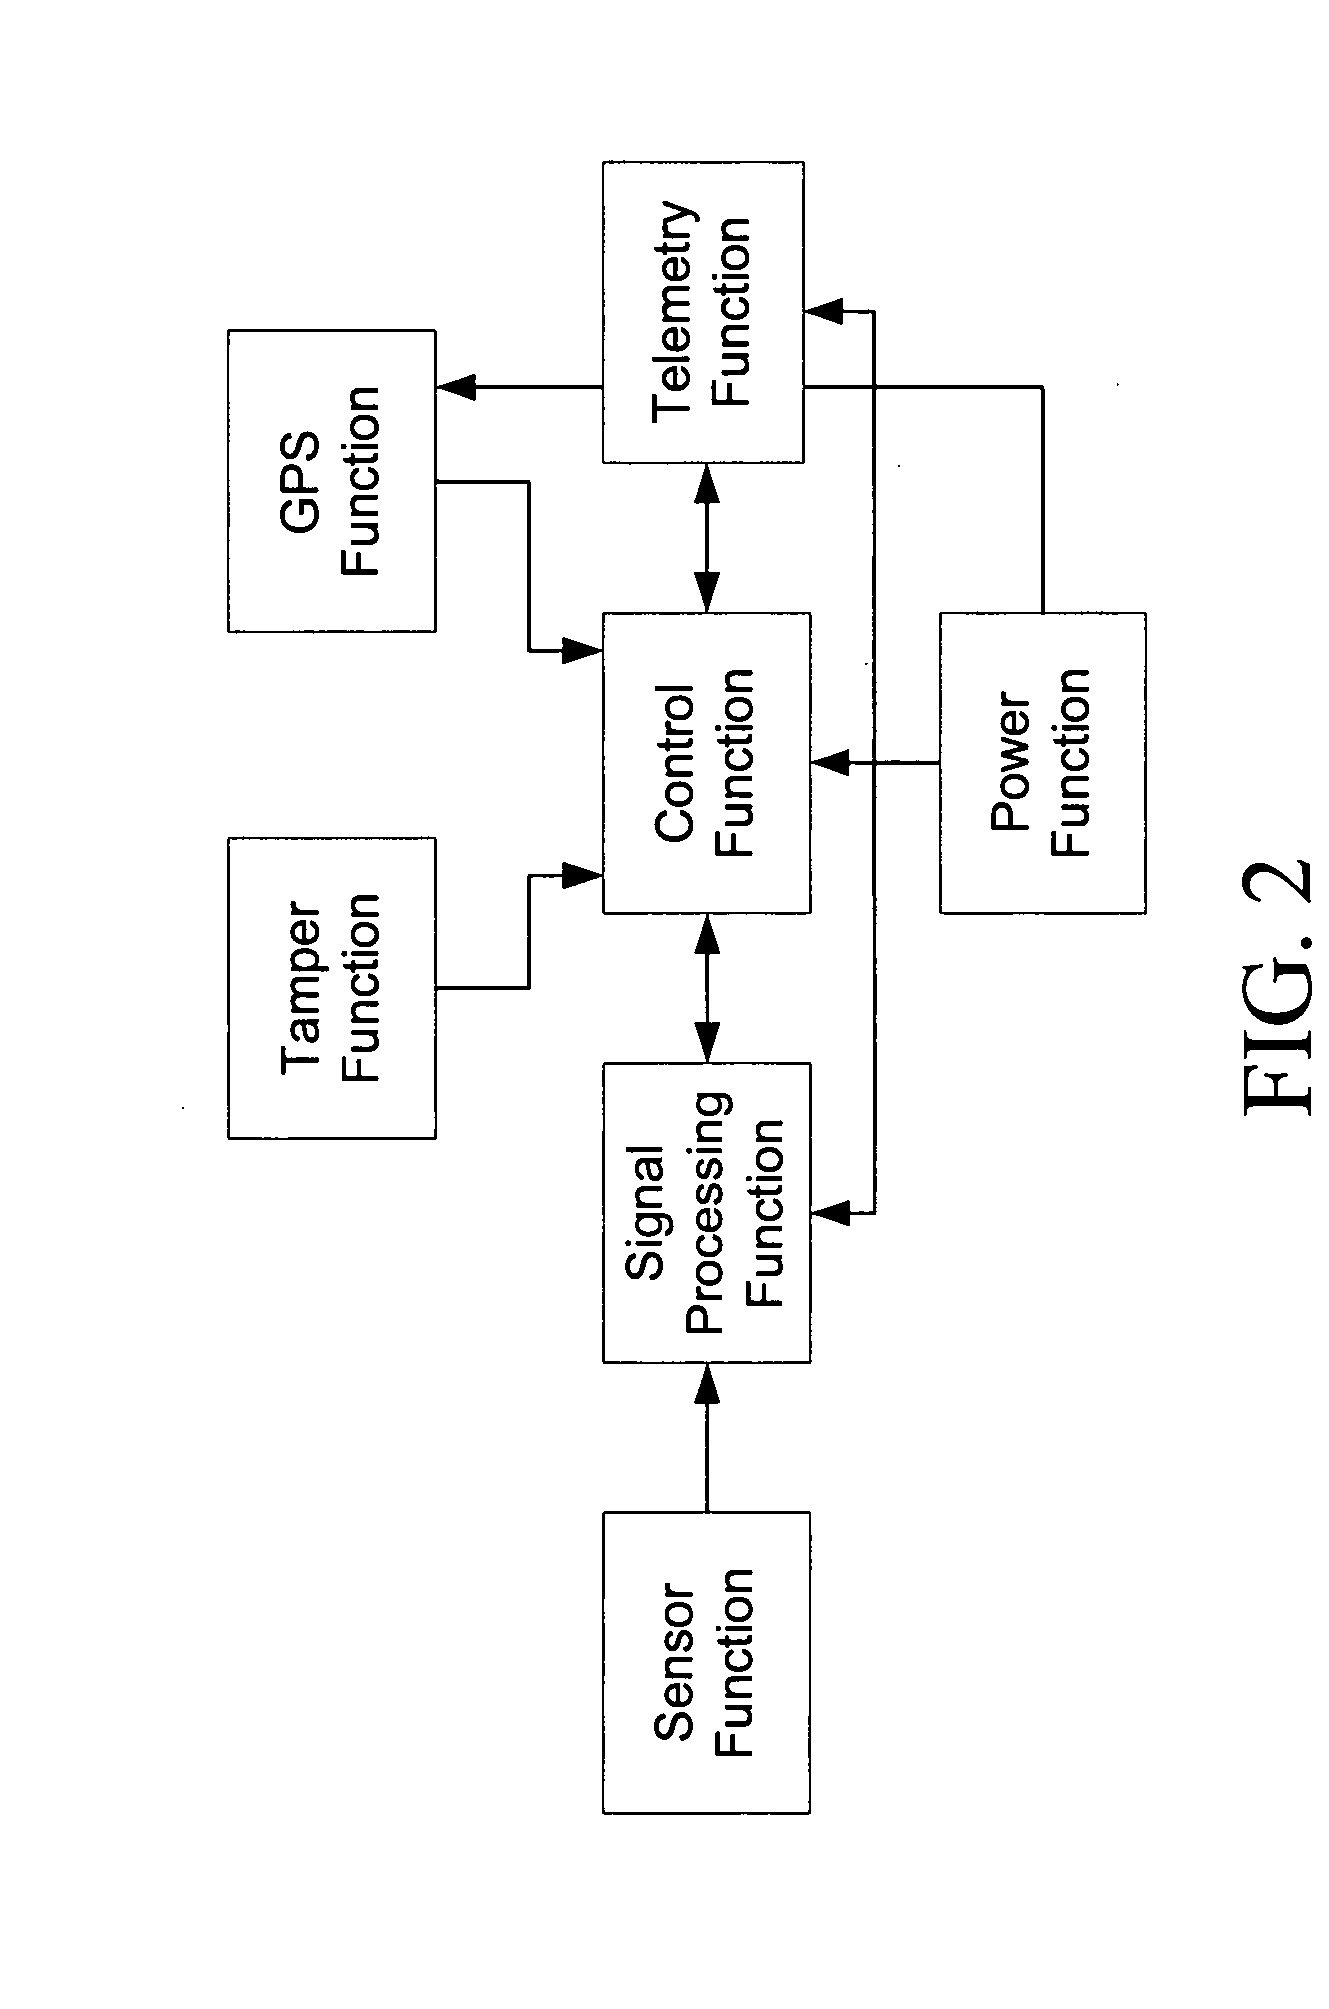 System and method for distributed monitoring of surroundings using telemetry of data from remote sensors